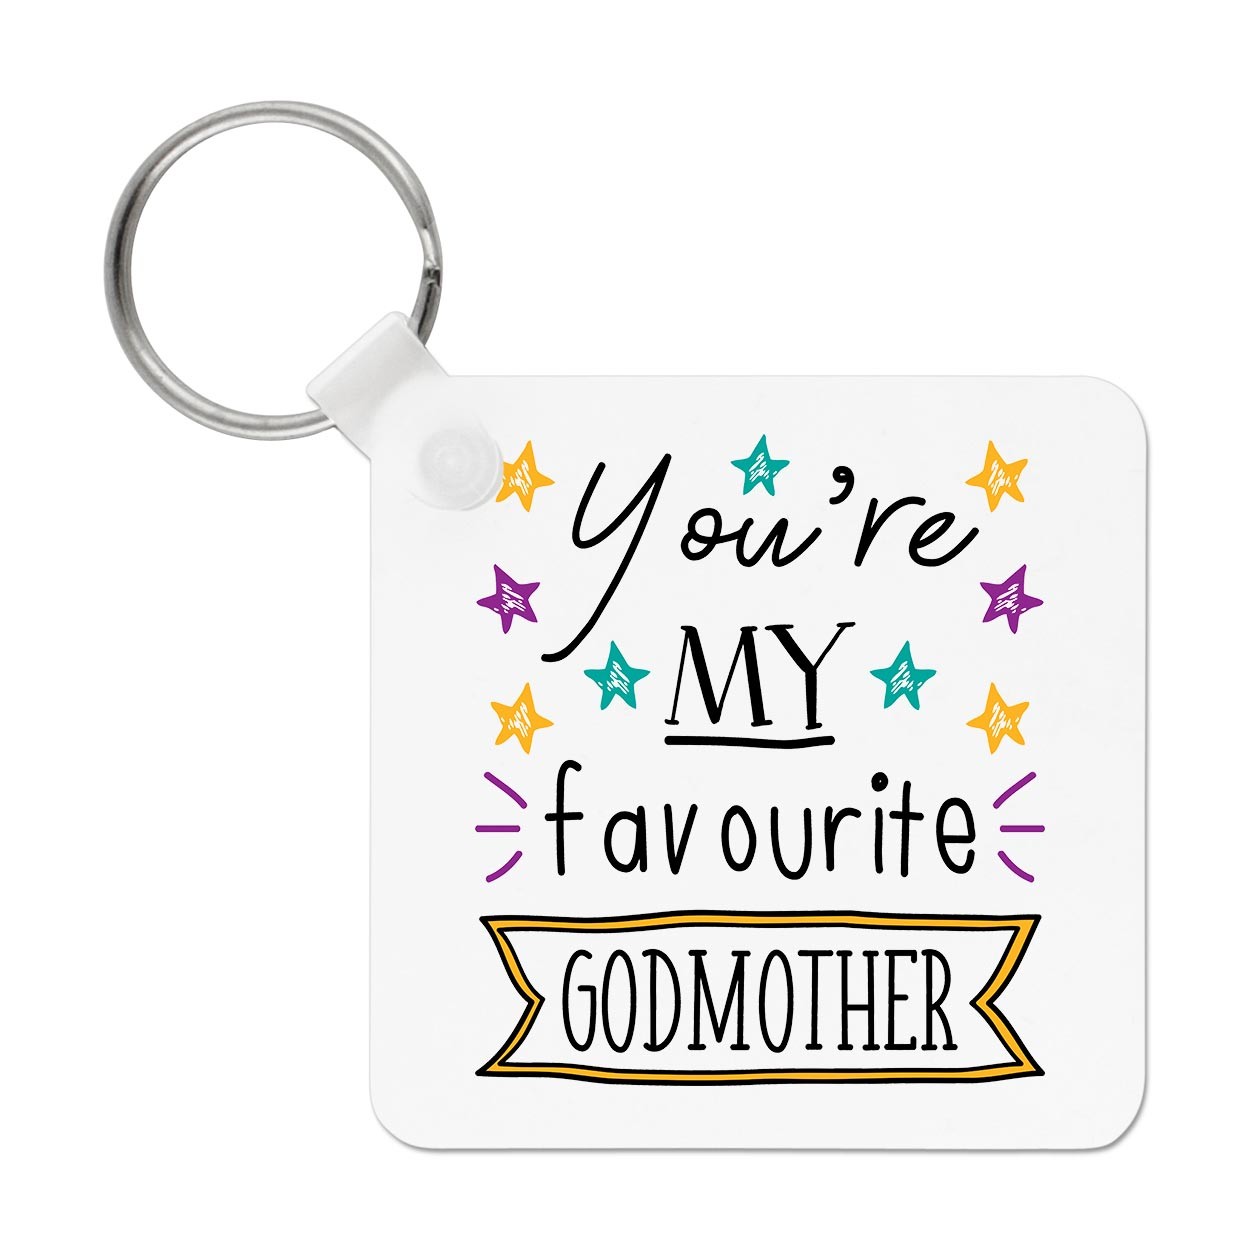 You're My Favourite Godmother Keyring Key Chain